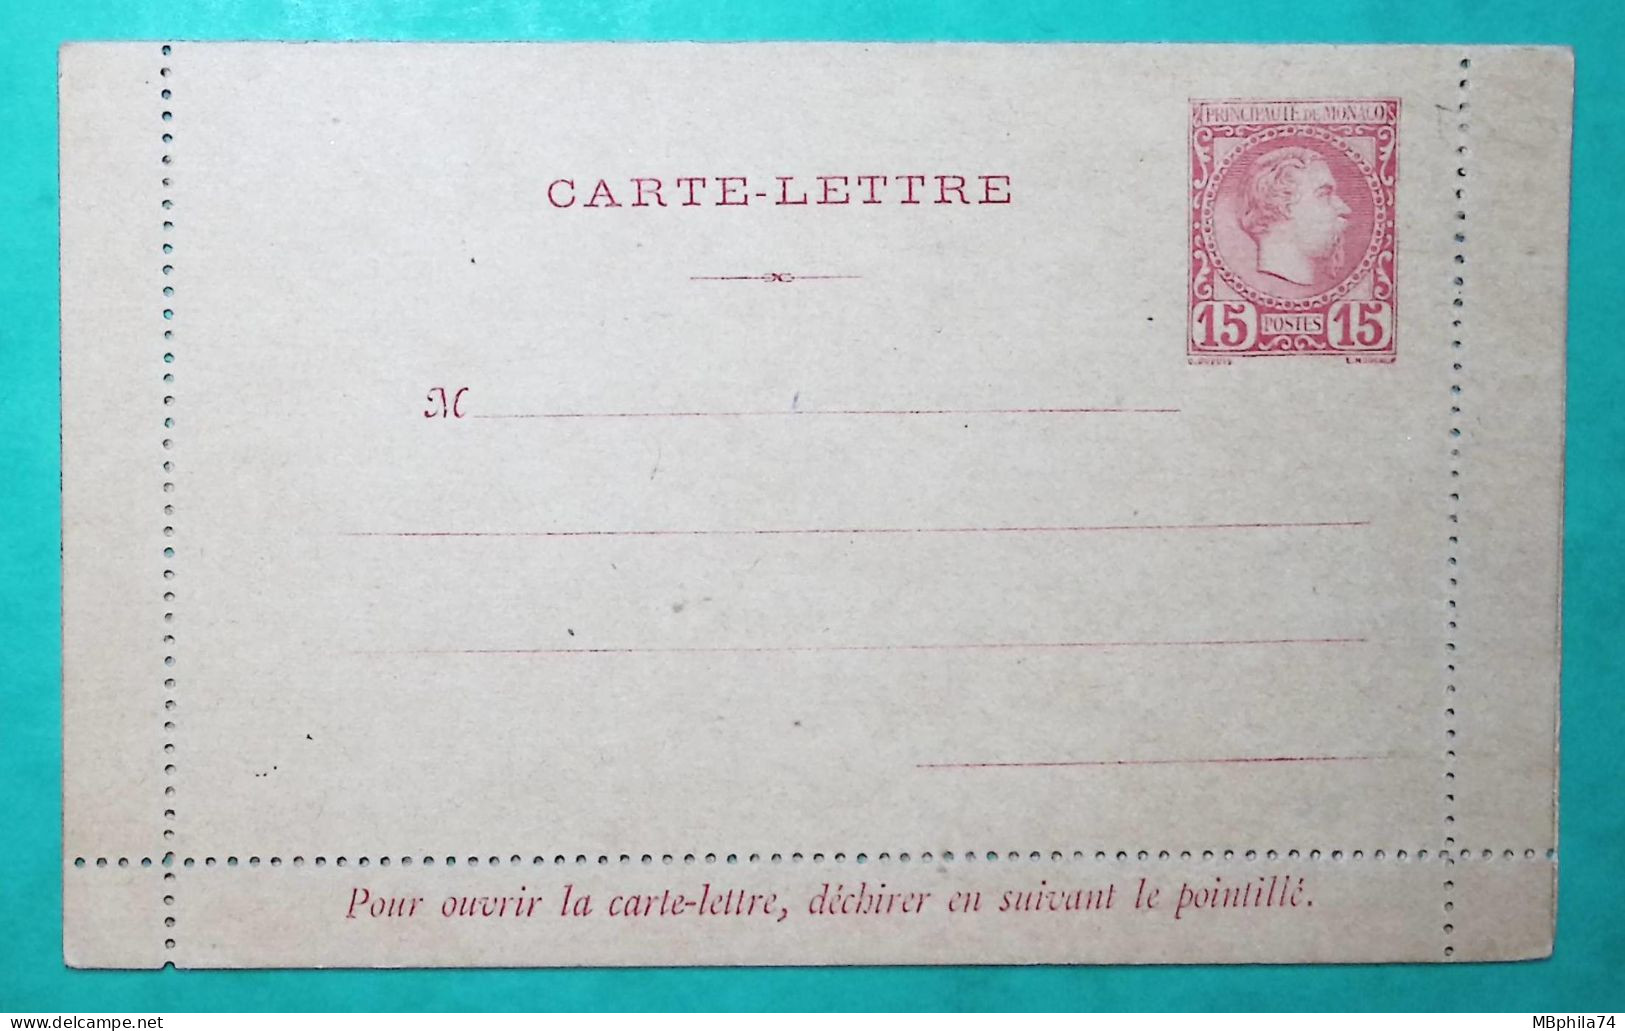 ENTIER 15C ROUGE CARTE LETTRE PRINCE CHARLES III MONACO NEUF COVER - Postal Stationery